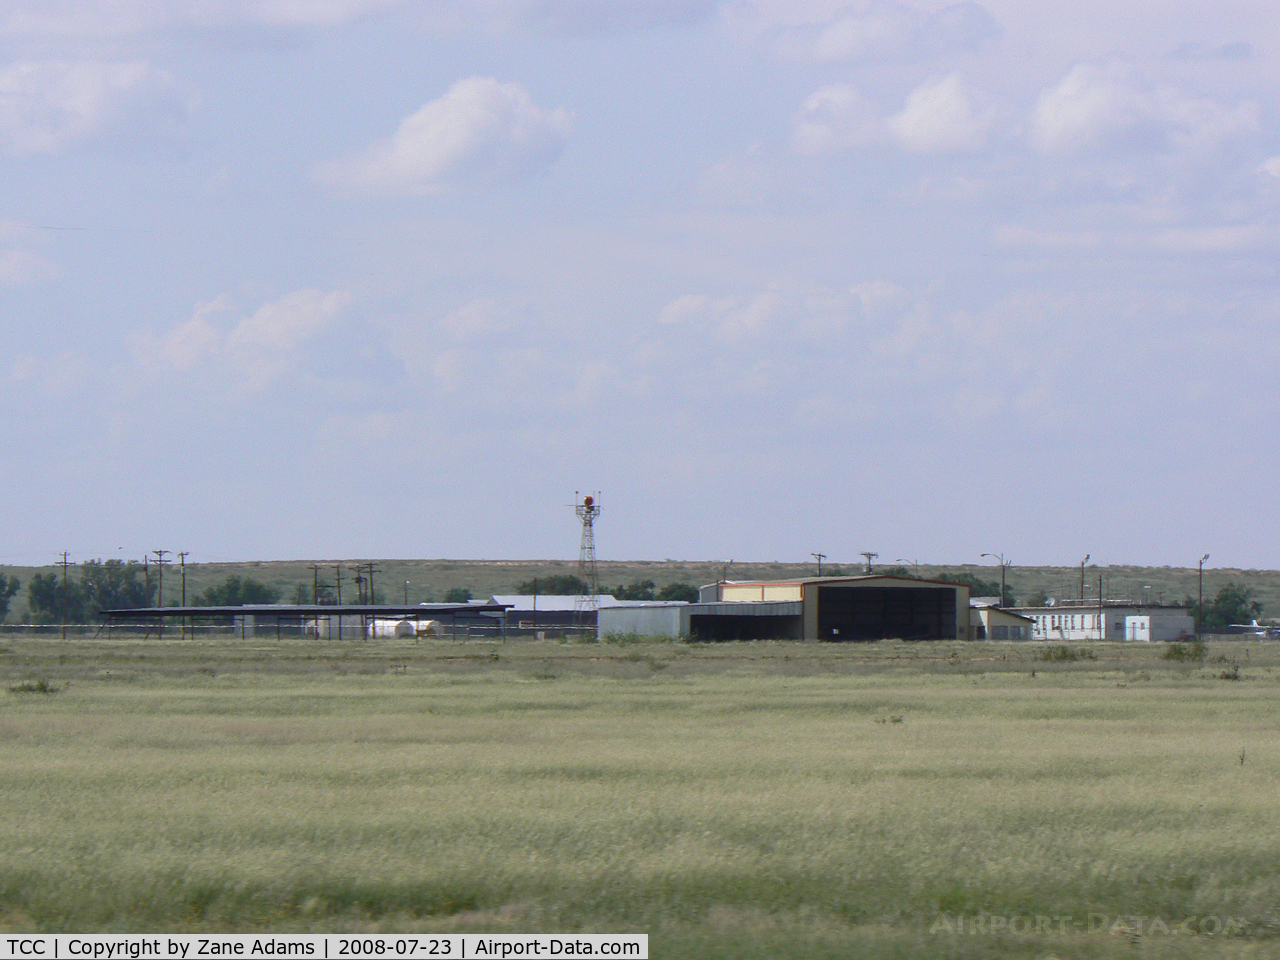 Tucumcari Municipal Airport (TCC) - Tucumcari New Mexico - from I-40 at the posted 75mph! ...I didn't have time to stop!